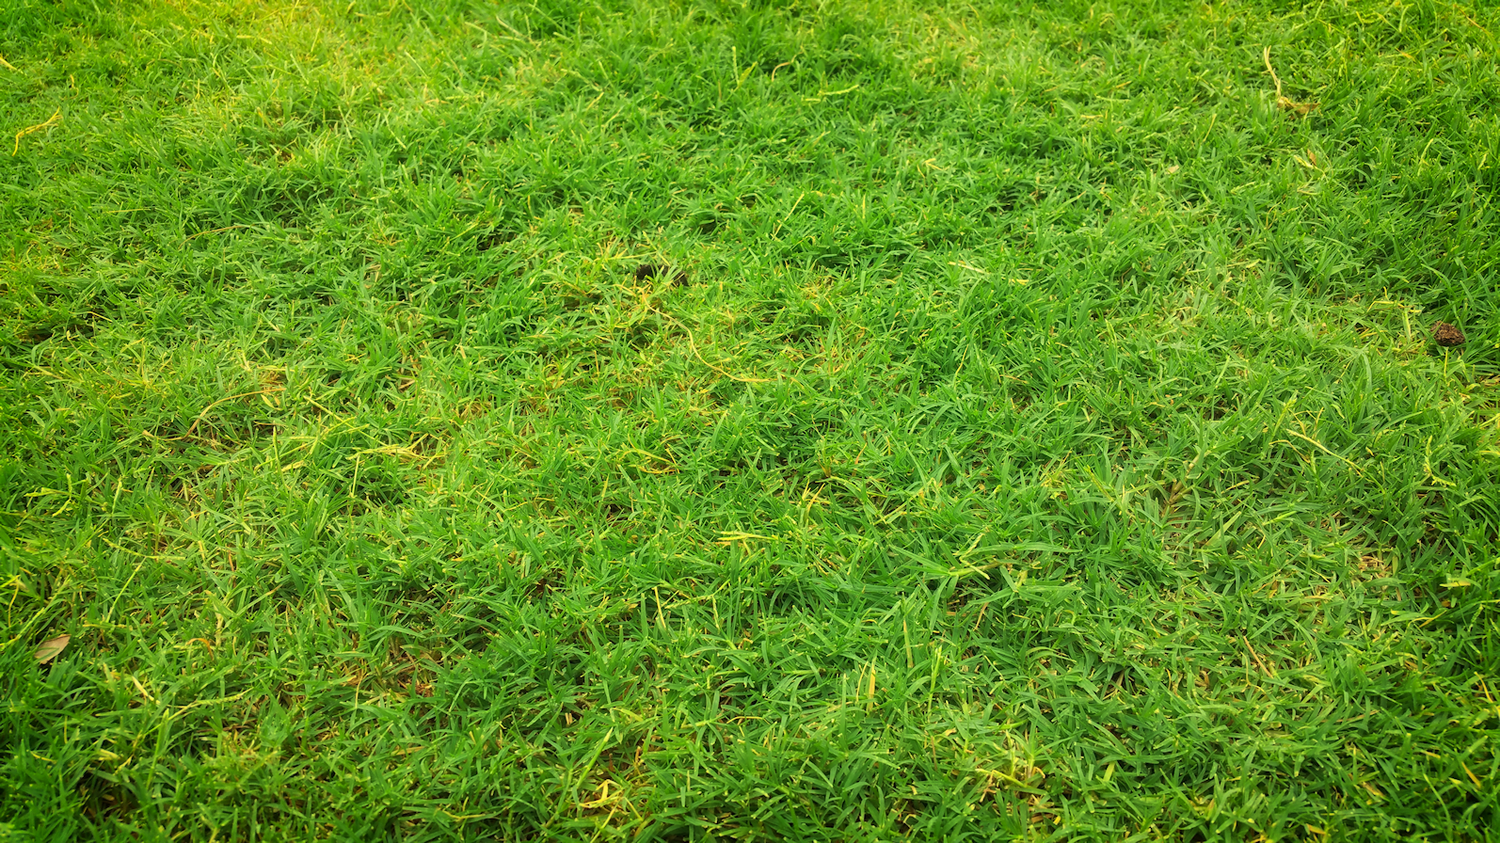 Lawn rating: straggly.